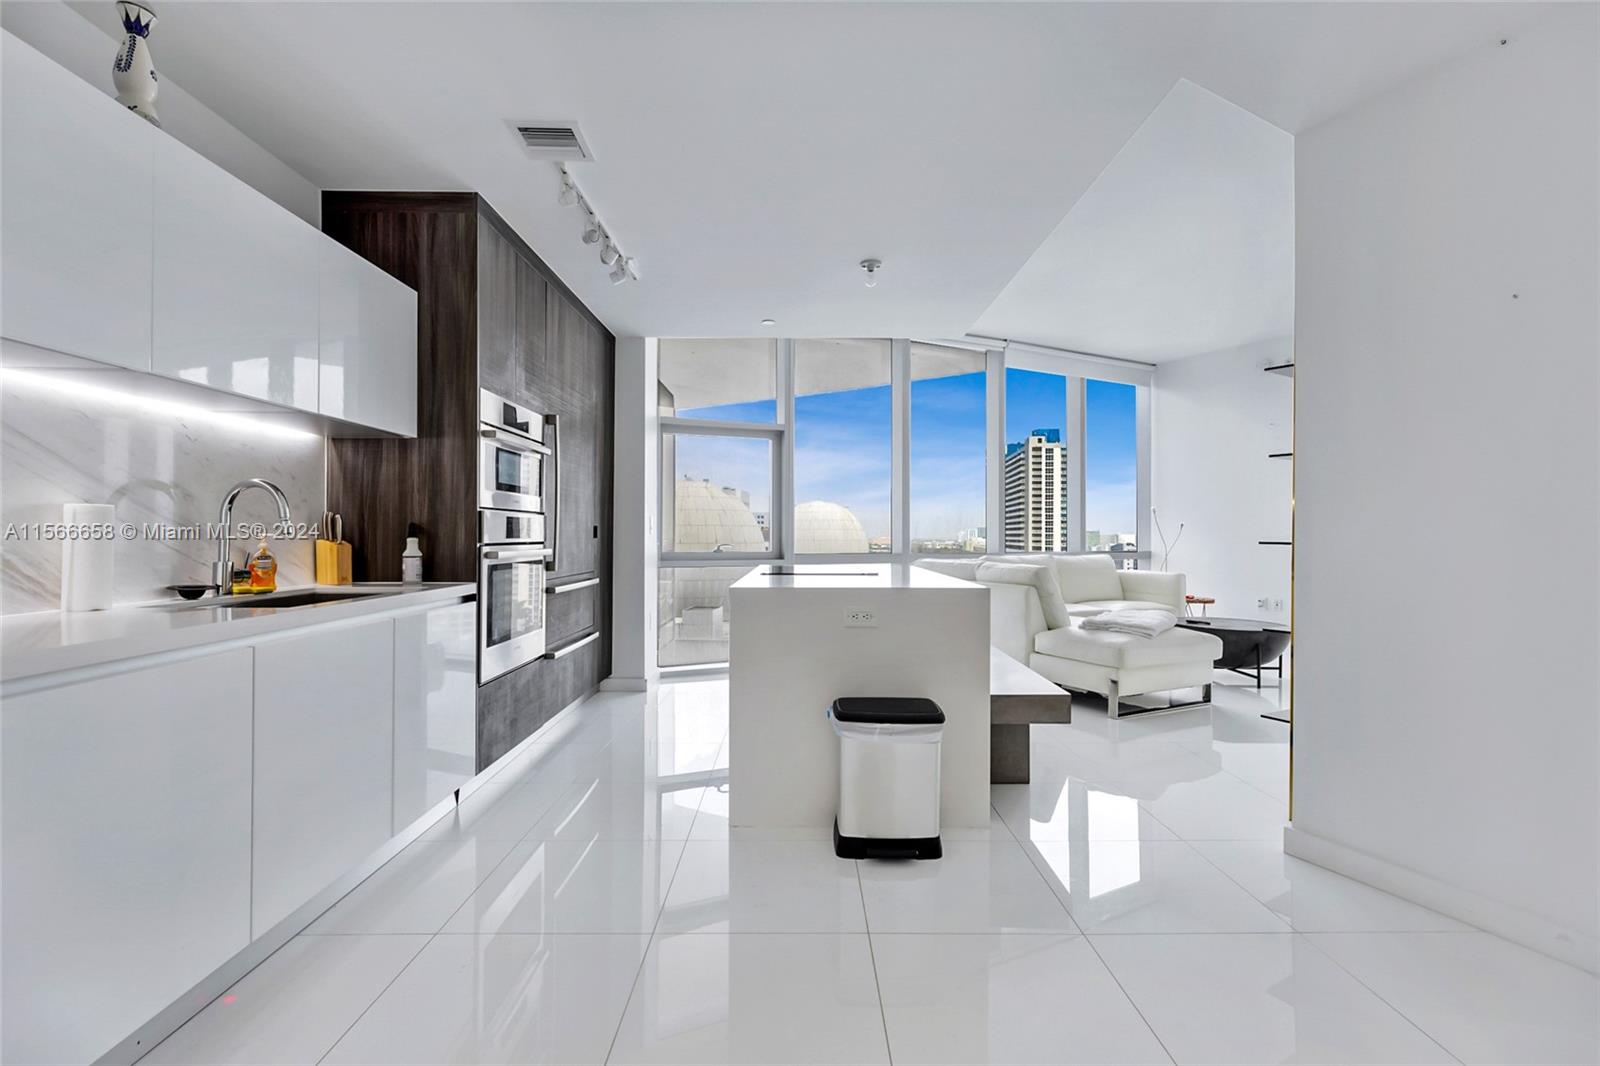 Perfect location In Hard Downtown Miami World Center HIGH CEILINGS 10' WITH A FLOOR TO CEILING WINDOWS ITALIAN KITCHEN AND TOP OF THE LINE APPLIANCES BOSH MARBLE FLOOR Most Amenities in the World including Basketball Court, 5 pools, Spa, Gym with boxing area, Bbq Kitchen, Virtual Golf, Recording Studio, Racquetball, Yoga, Sunrise pool, & Kids Play Area. Skydeck, Observatory to view stars with telescopes, Tennis courts, and Jacuzzi. EASY TO SHOW.AVAILABLE NOW